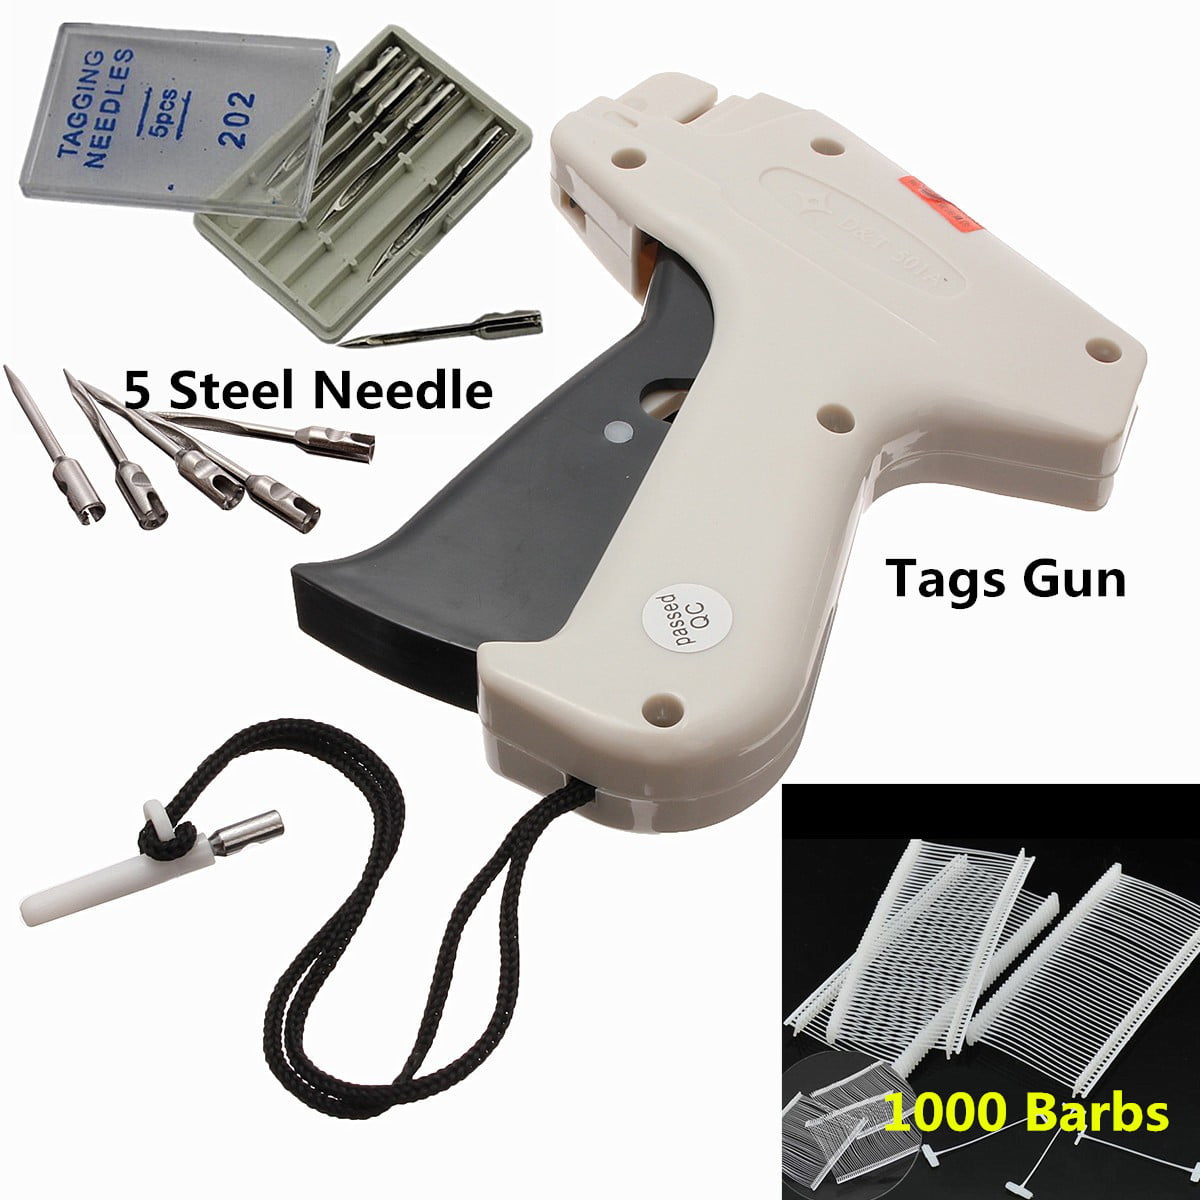 2000 2" barbs and 2 Extra Spare Needles 2 Garments Price Label Tag Guns 